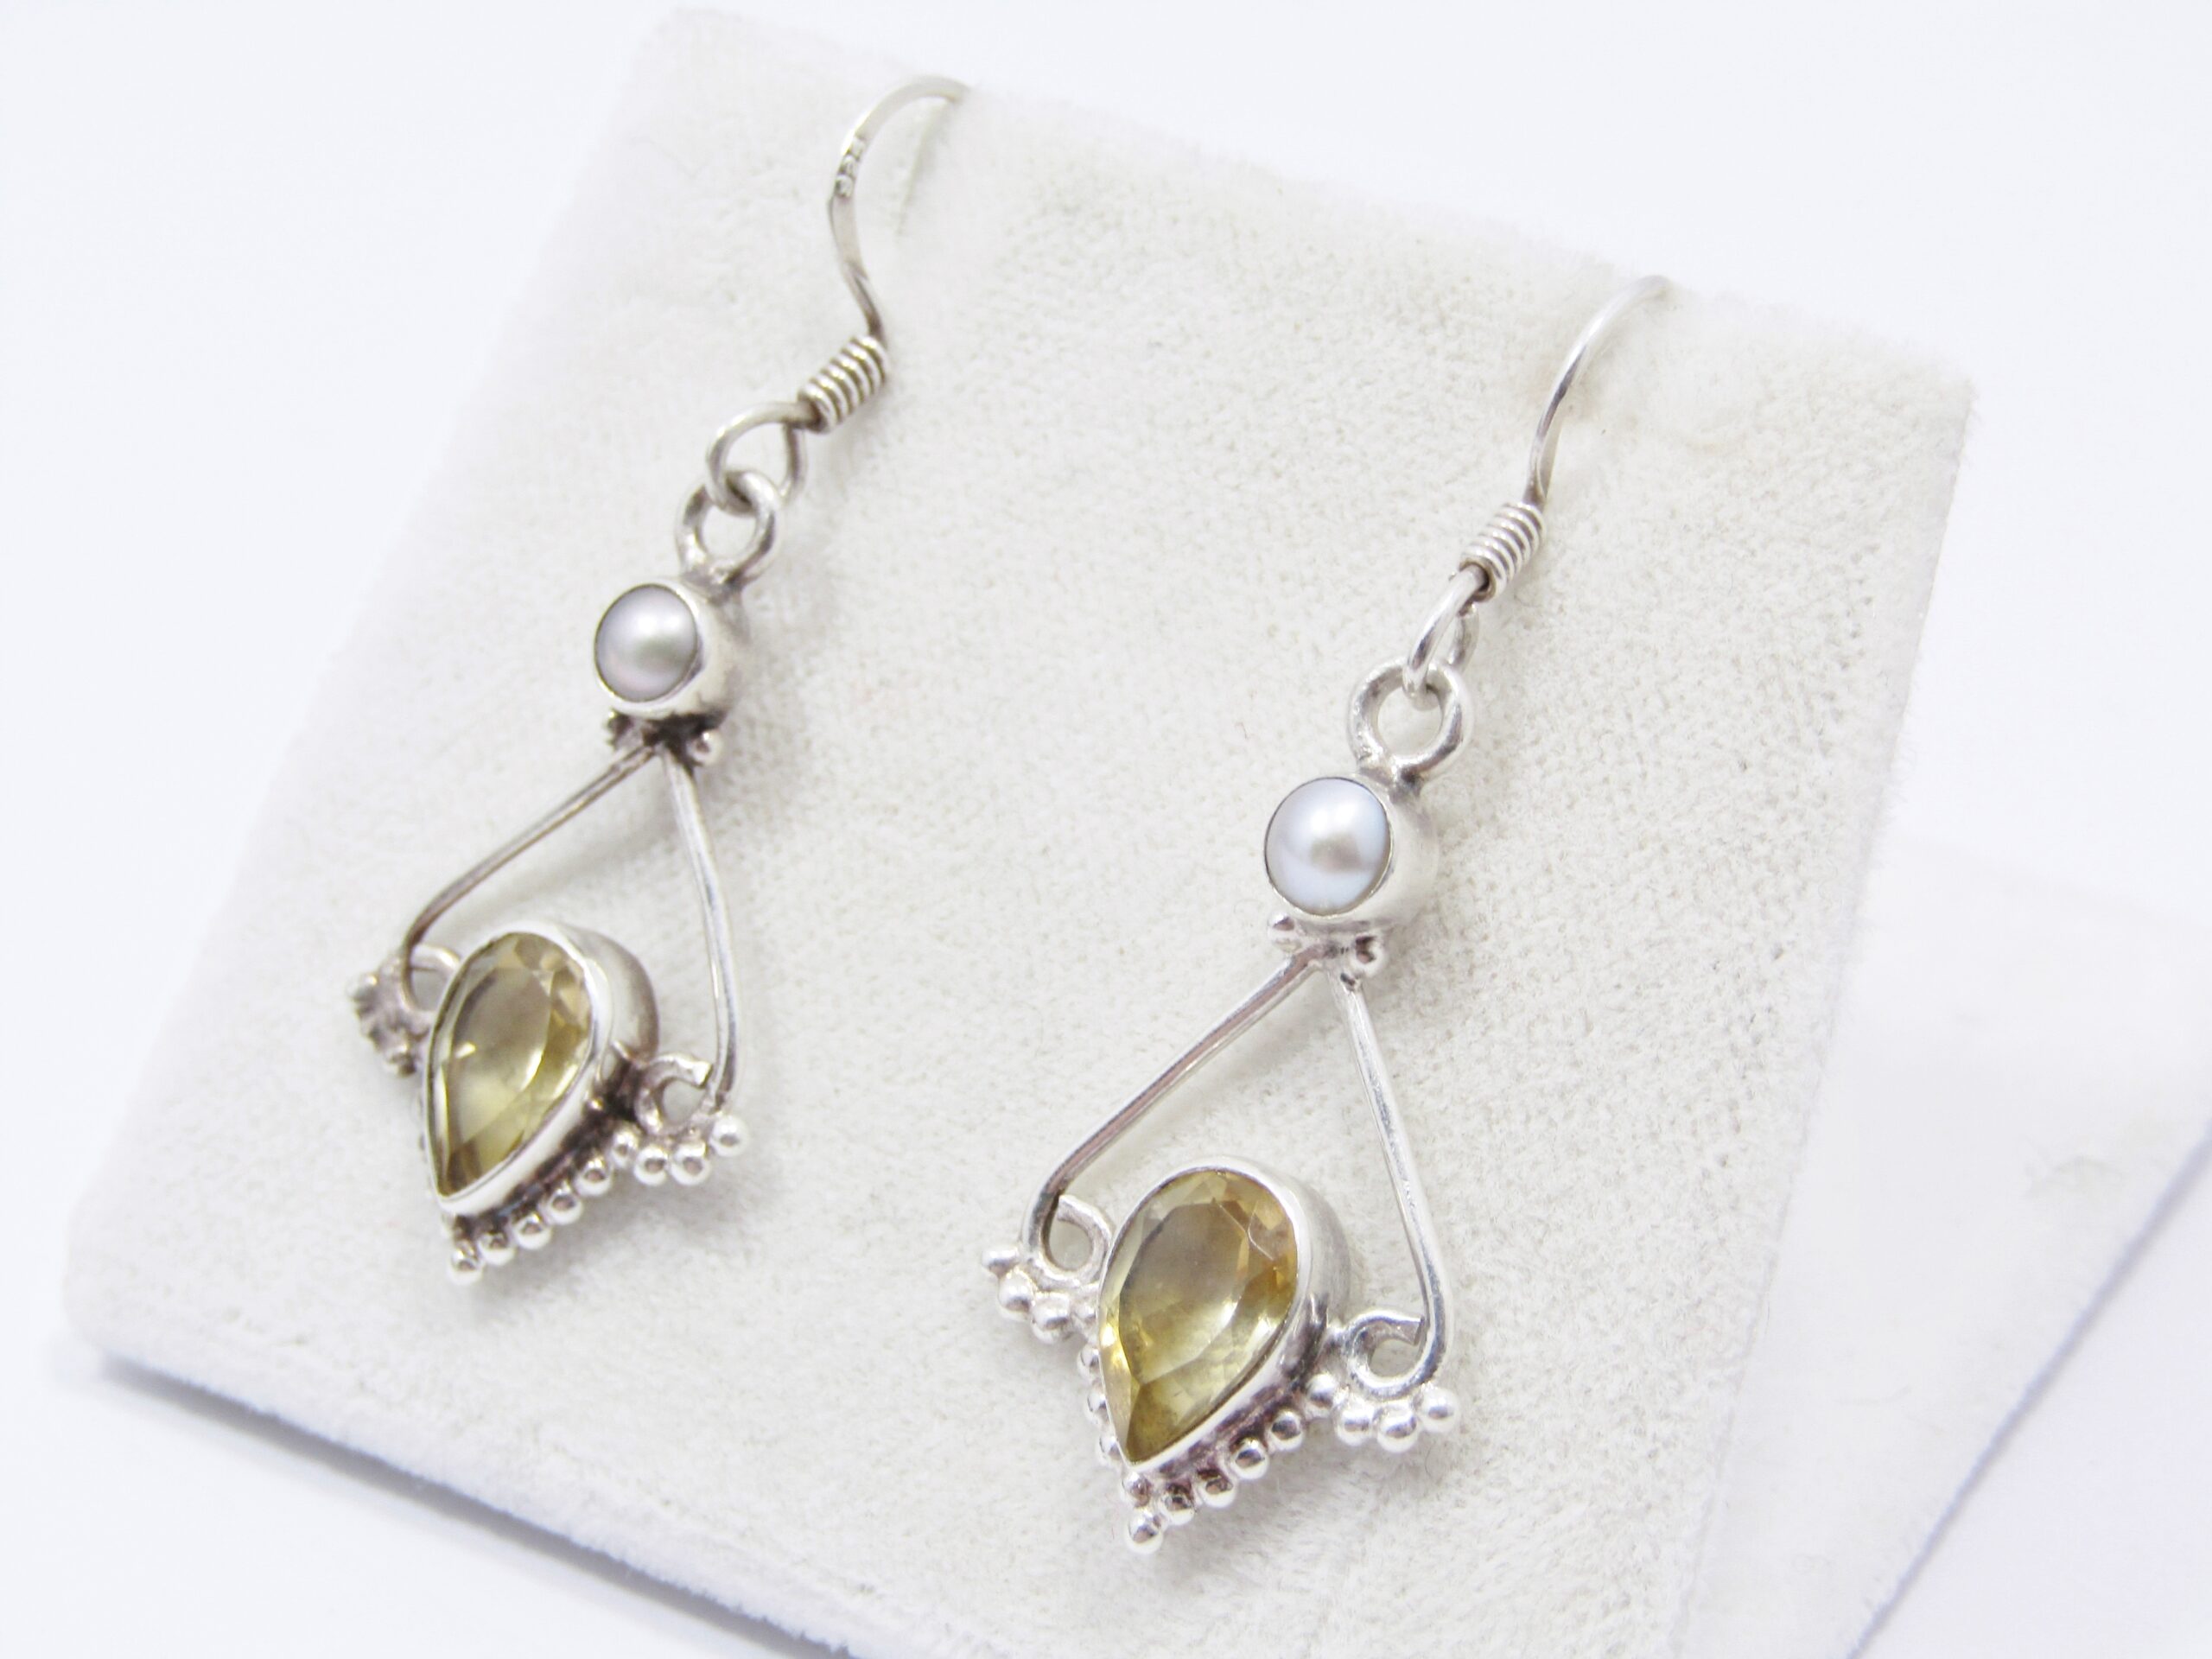 A Beautiful Pair of Pearl and Citrine Dangling Earrings in Sterling Silver.